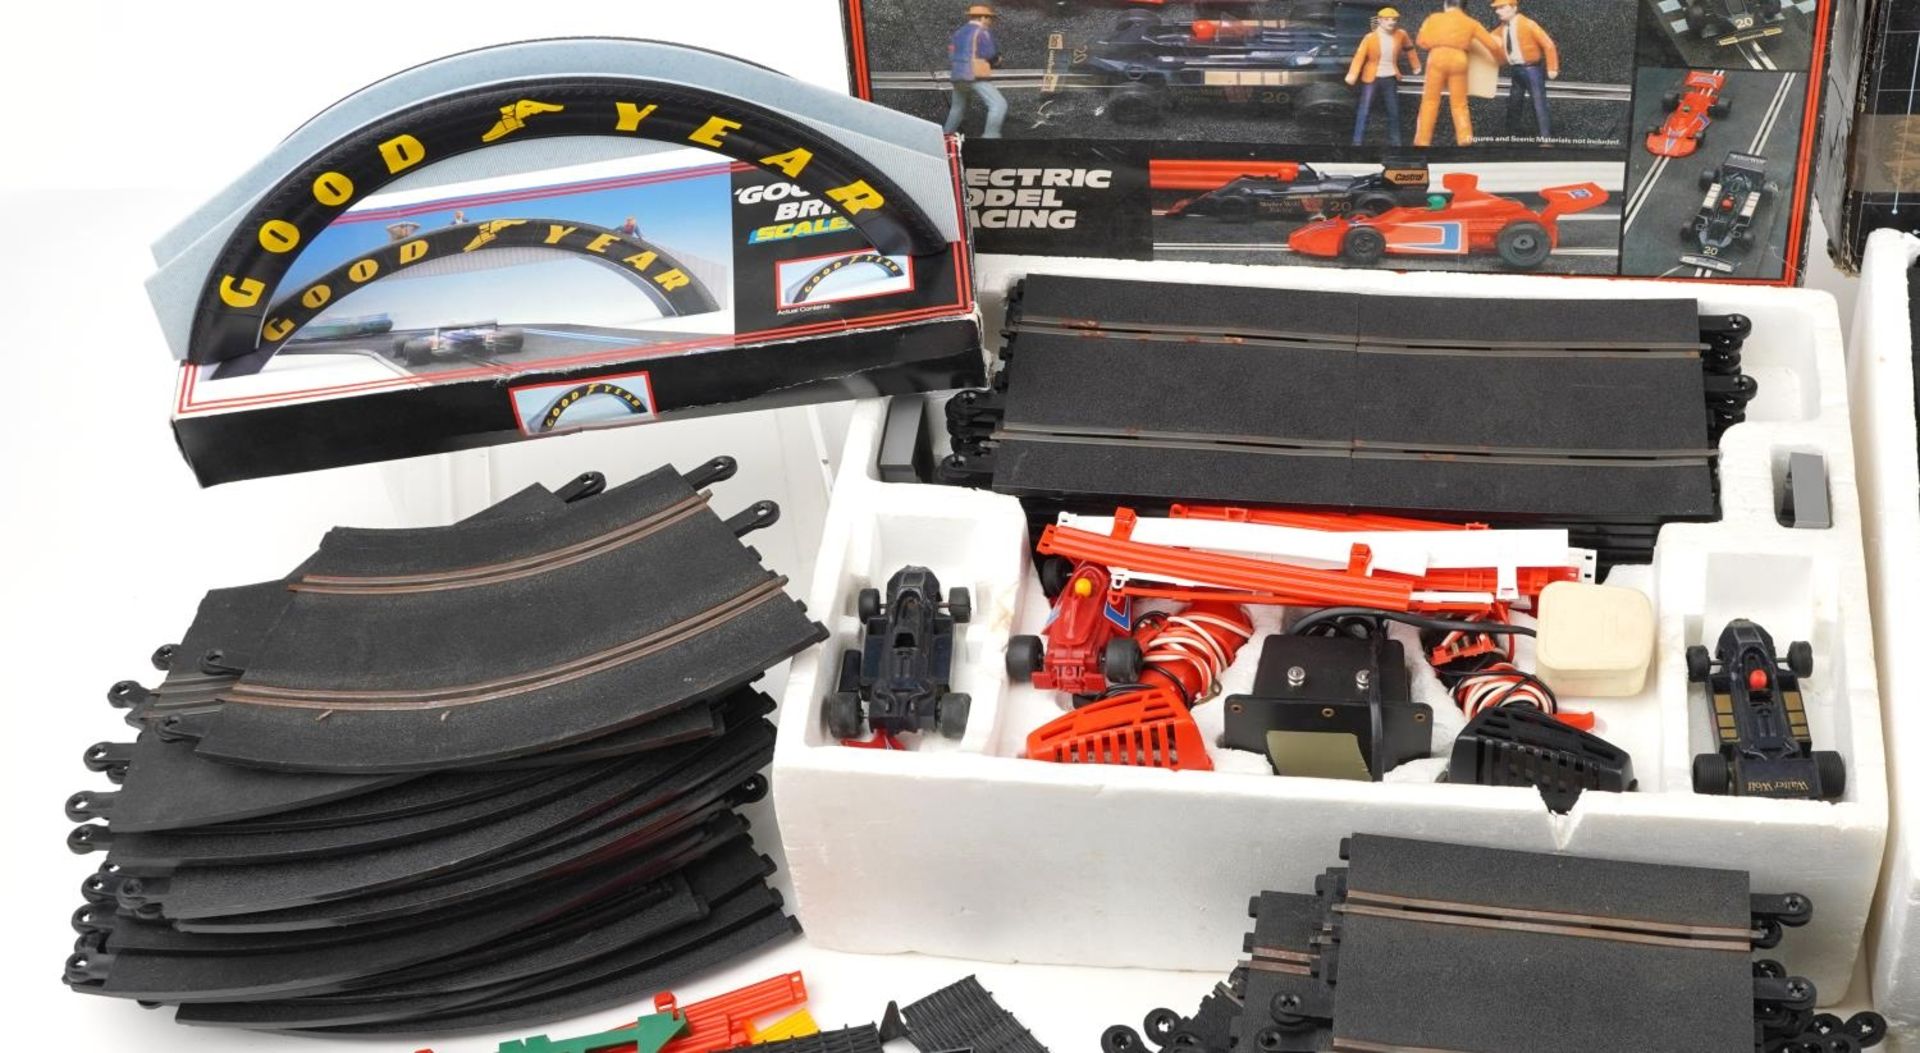 Vintage and later Scalextric model racing including Grand Prix with box - Image 2 of 5